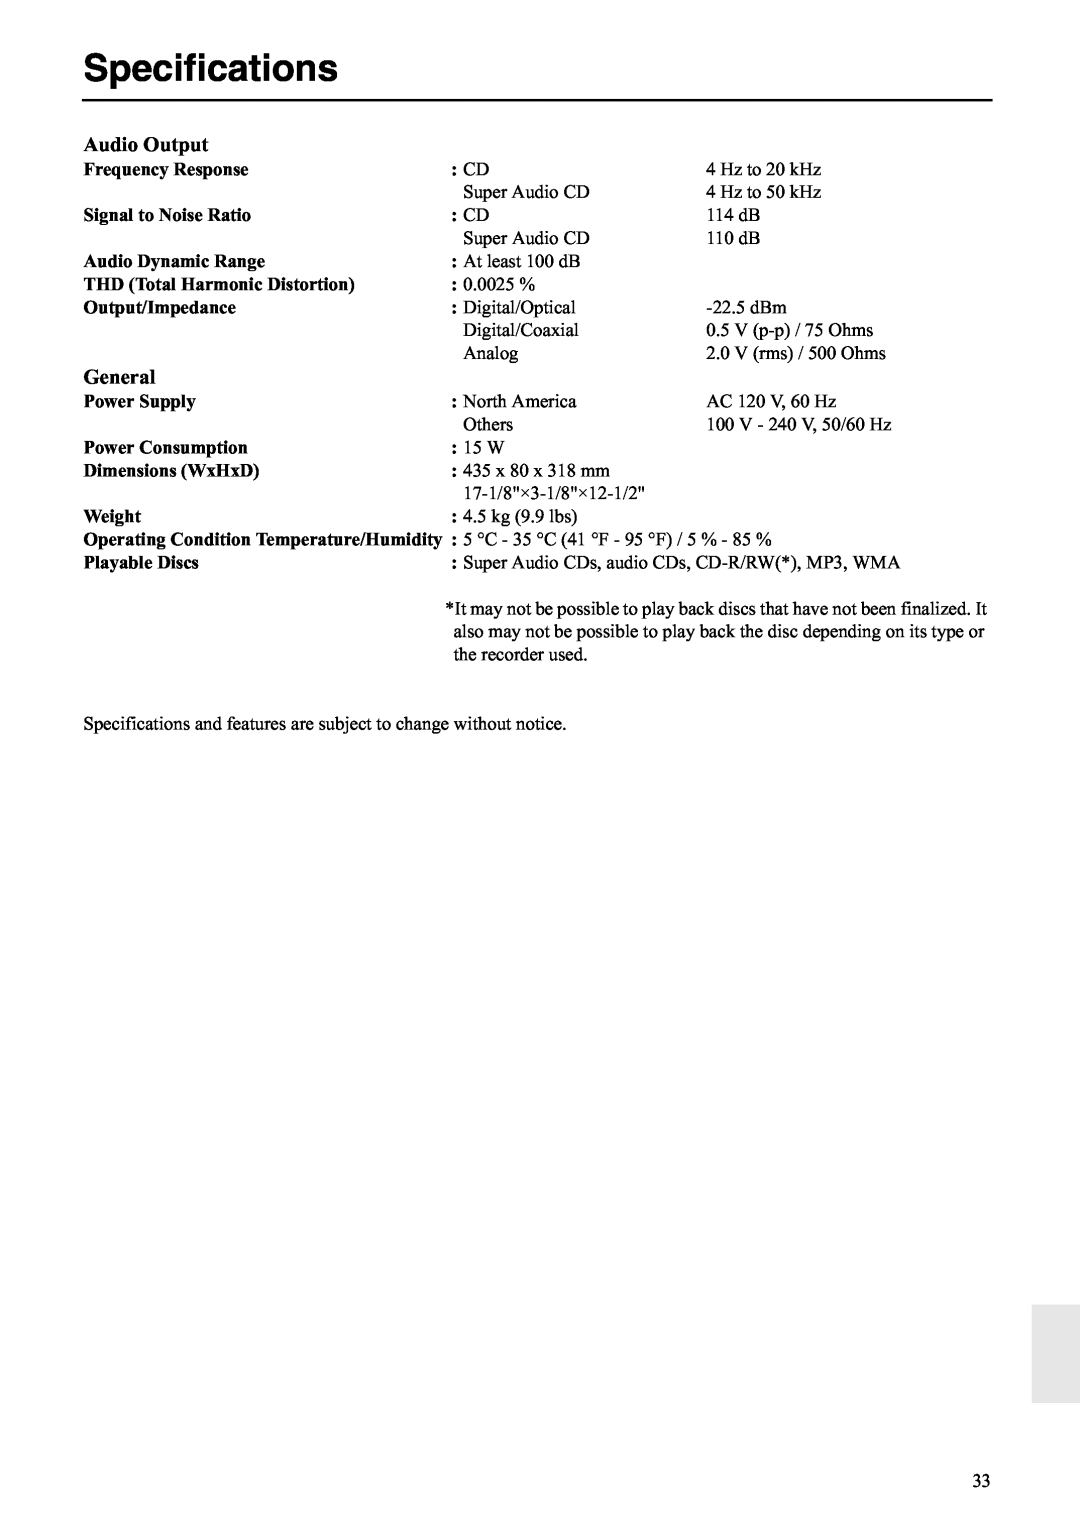 Onkyo C-S5VL instruction manual Specifications, Audio Output, General 